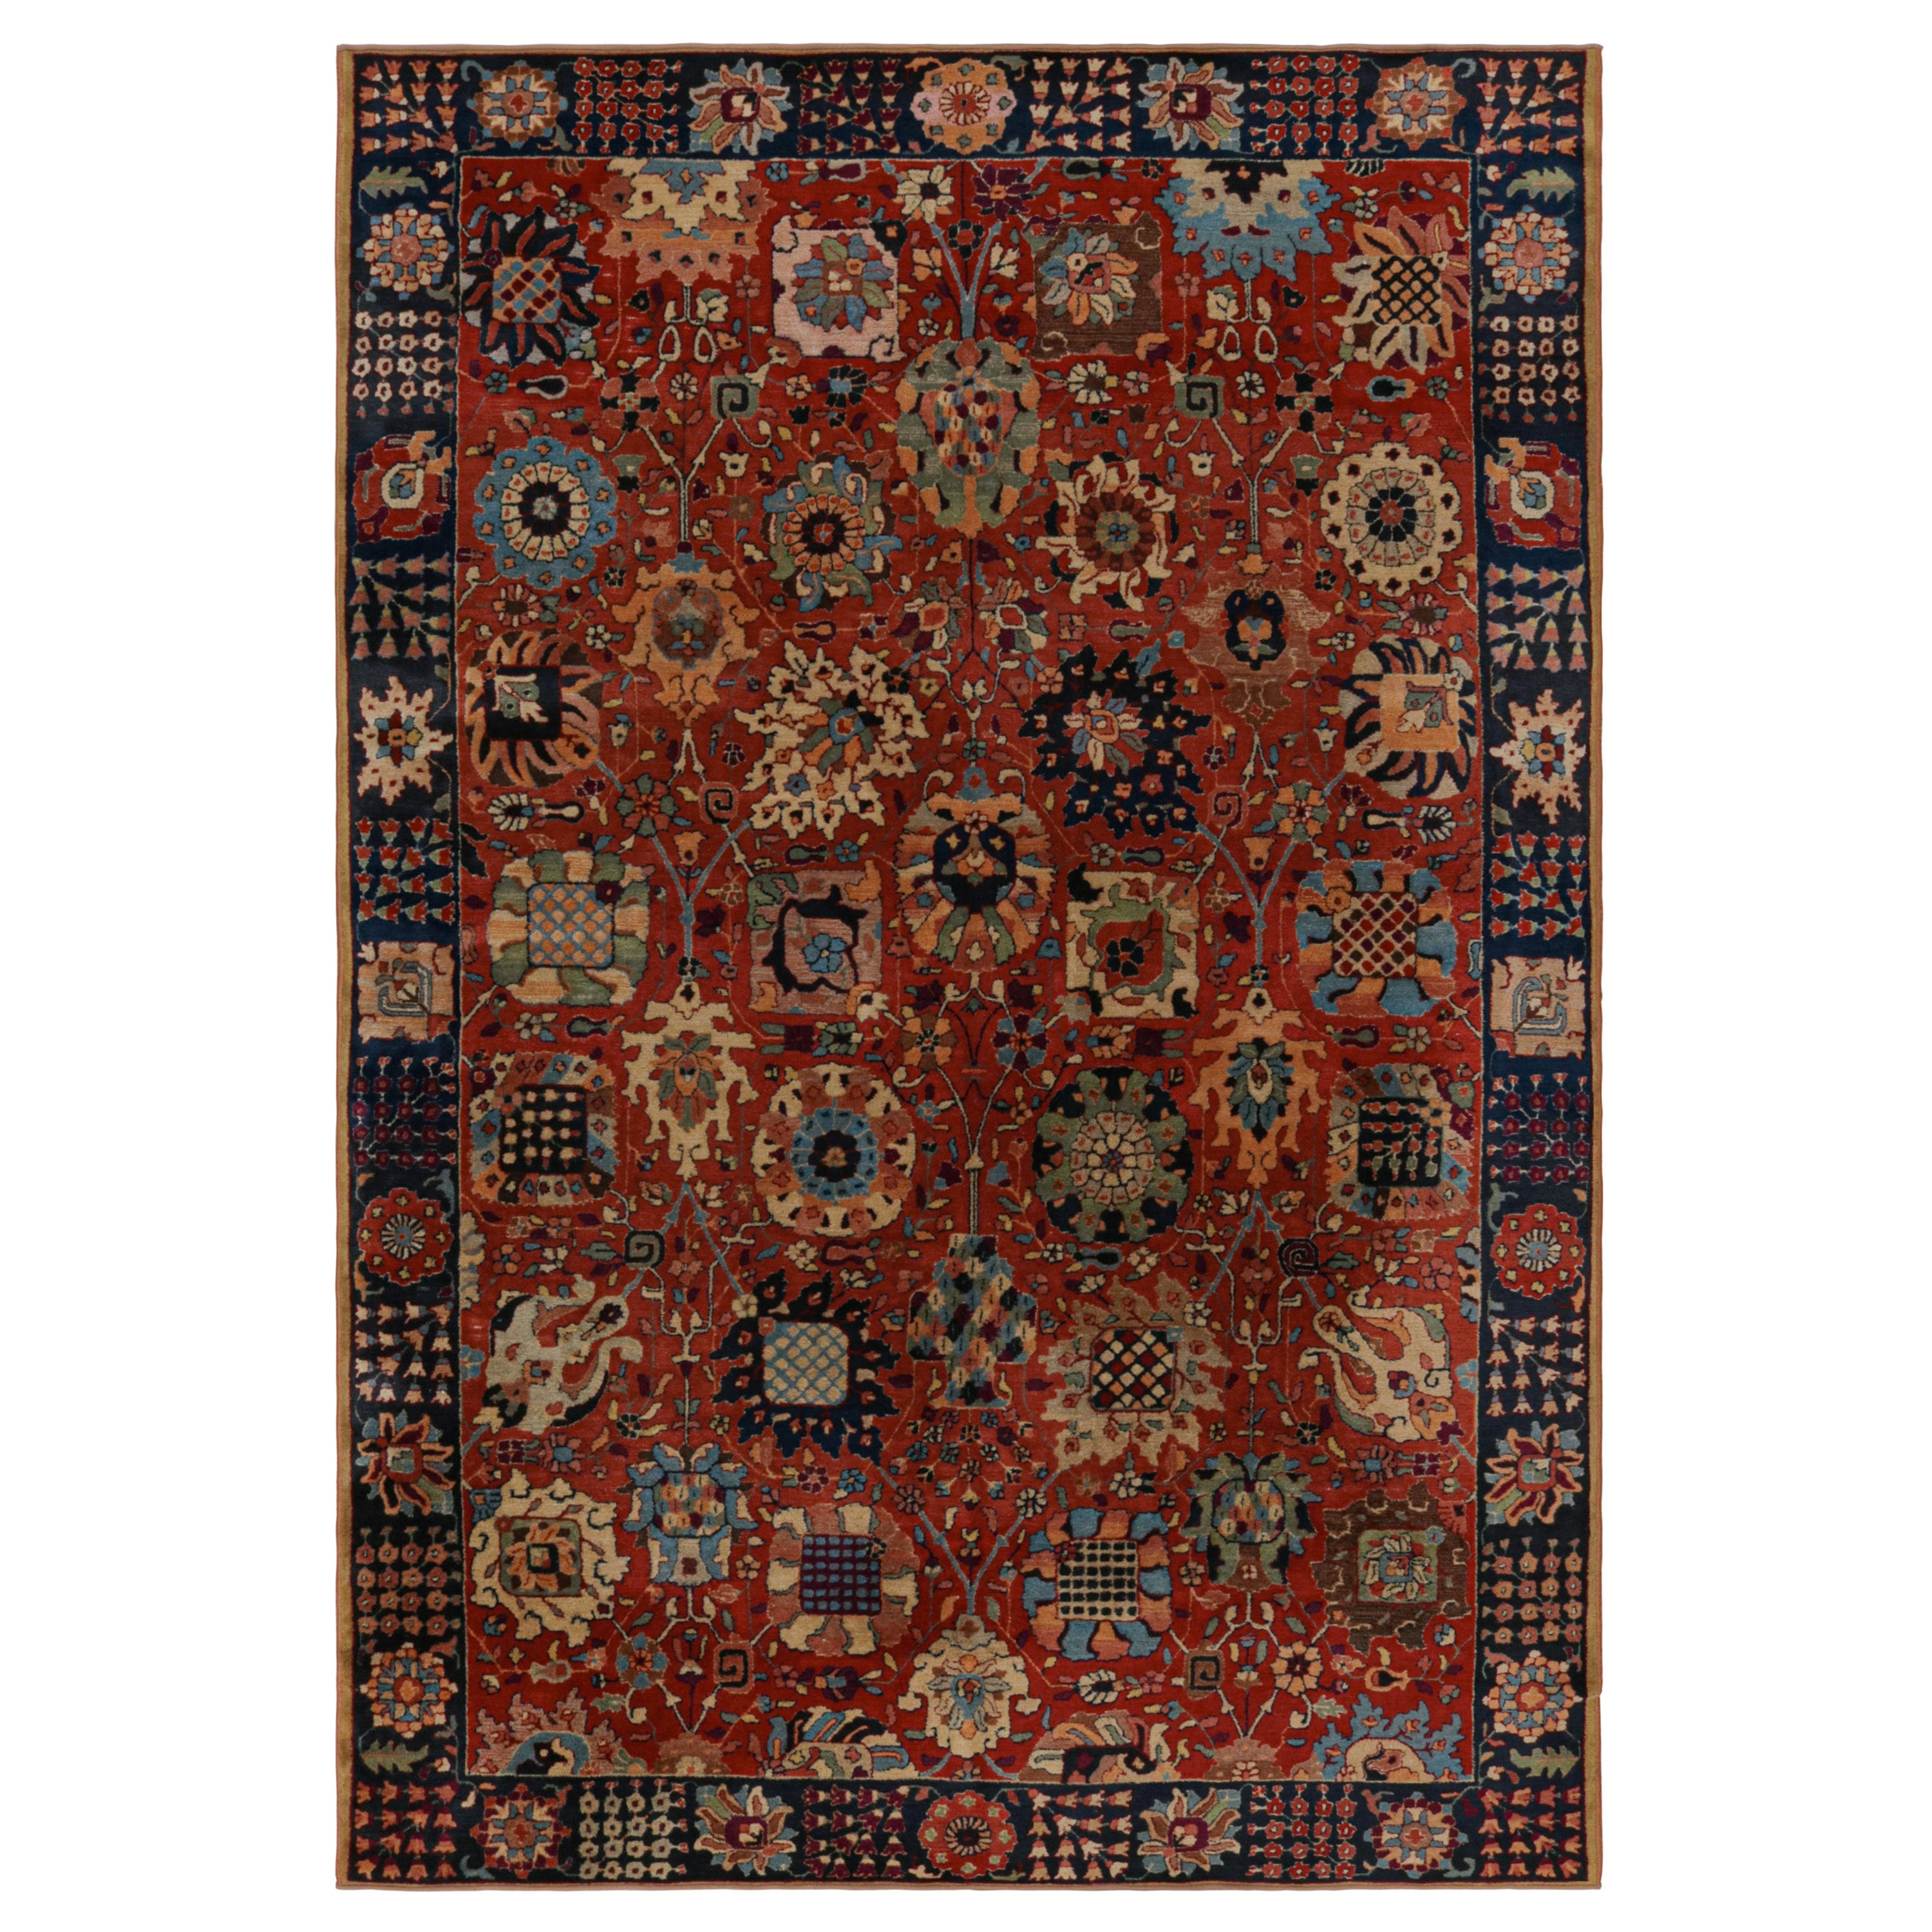 Antique Handmade Hooked Rug in Red with Floral patterns, from Rug & Kilim For Sale